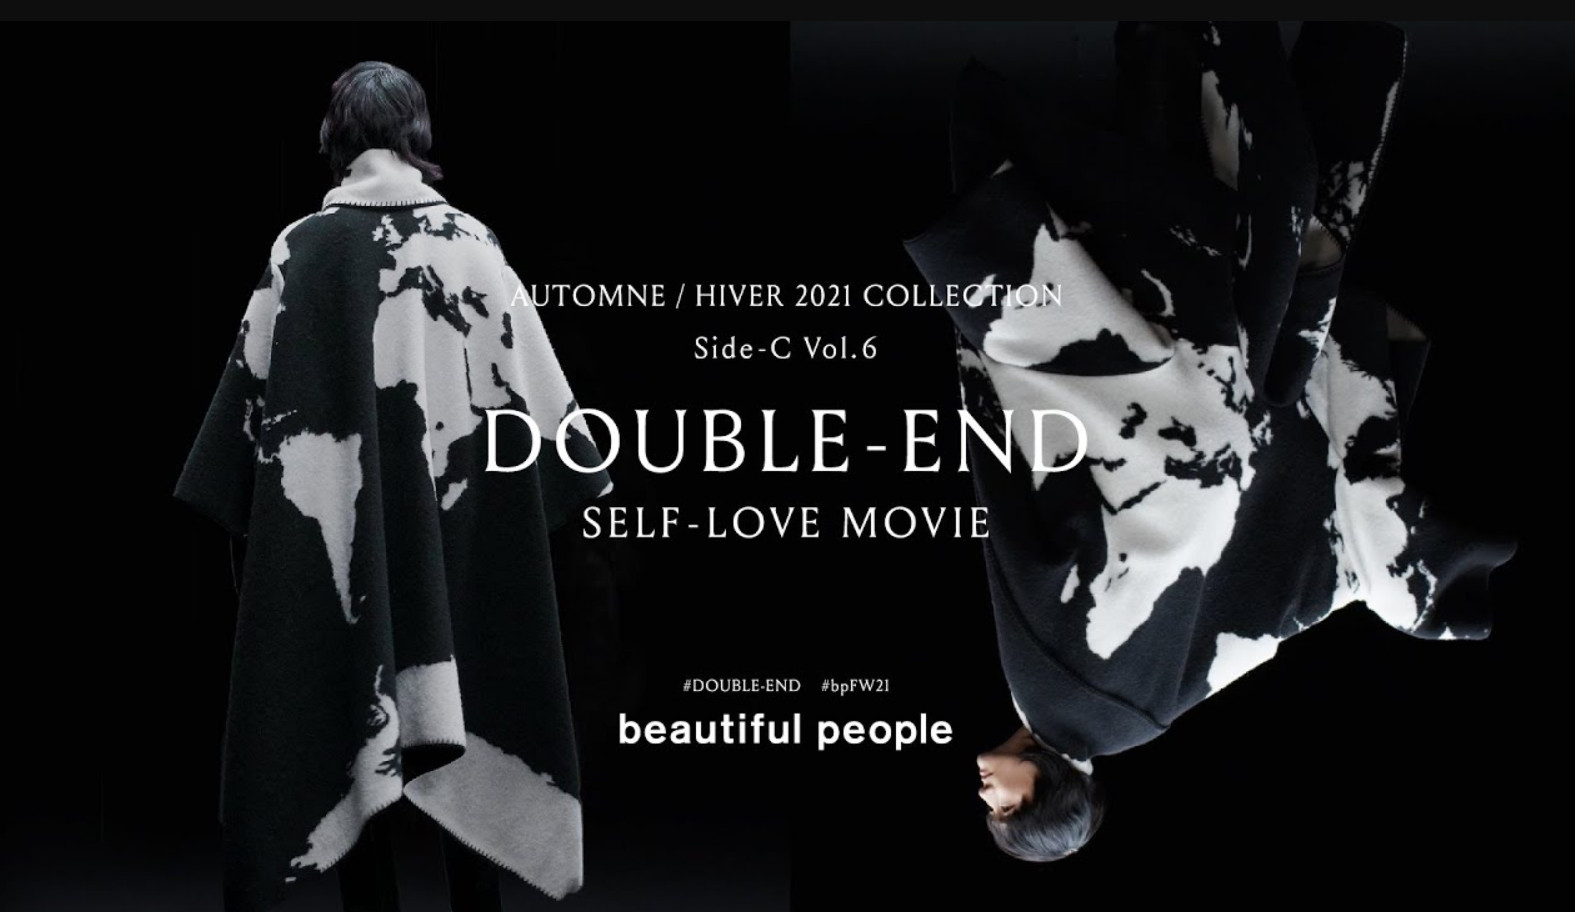 Beautiful people fall winter 2021 paris collection side c vol.6 double end